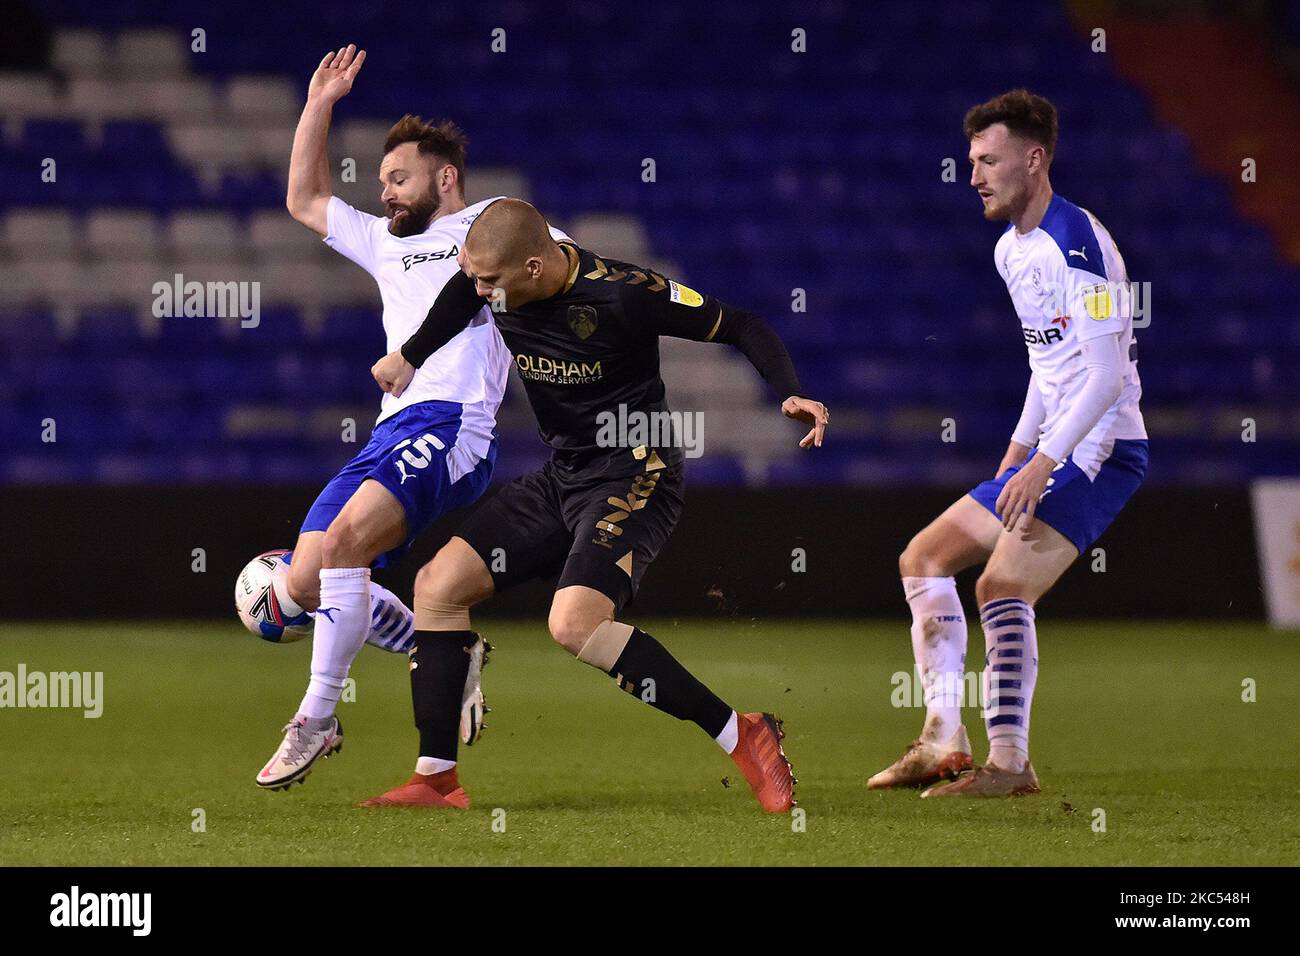 Oldham Athletic's Harry Clarke clears from Tranmere Rovers' Danny Lloyd and Tranmere Rovers' Paul Lewis during the Sky Bet League 2 match between Oldham Athletic and Tranmere Rovers at Boundary Park, Oldham on Tuesday 1st December 2020. (Photo by Eddie Garvey/MI News/NurPhoto) Stock Photo